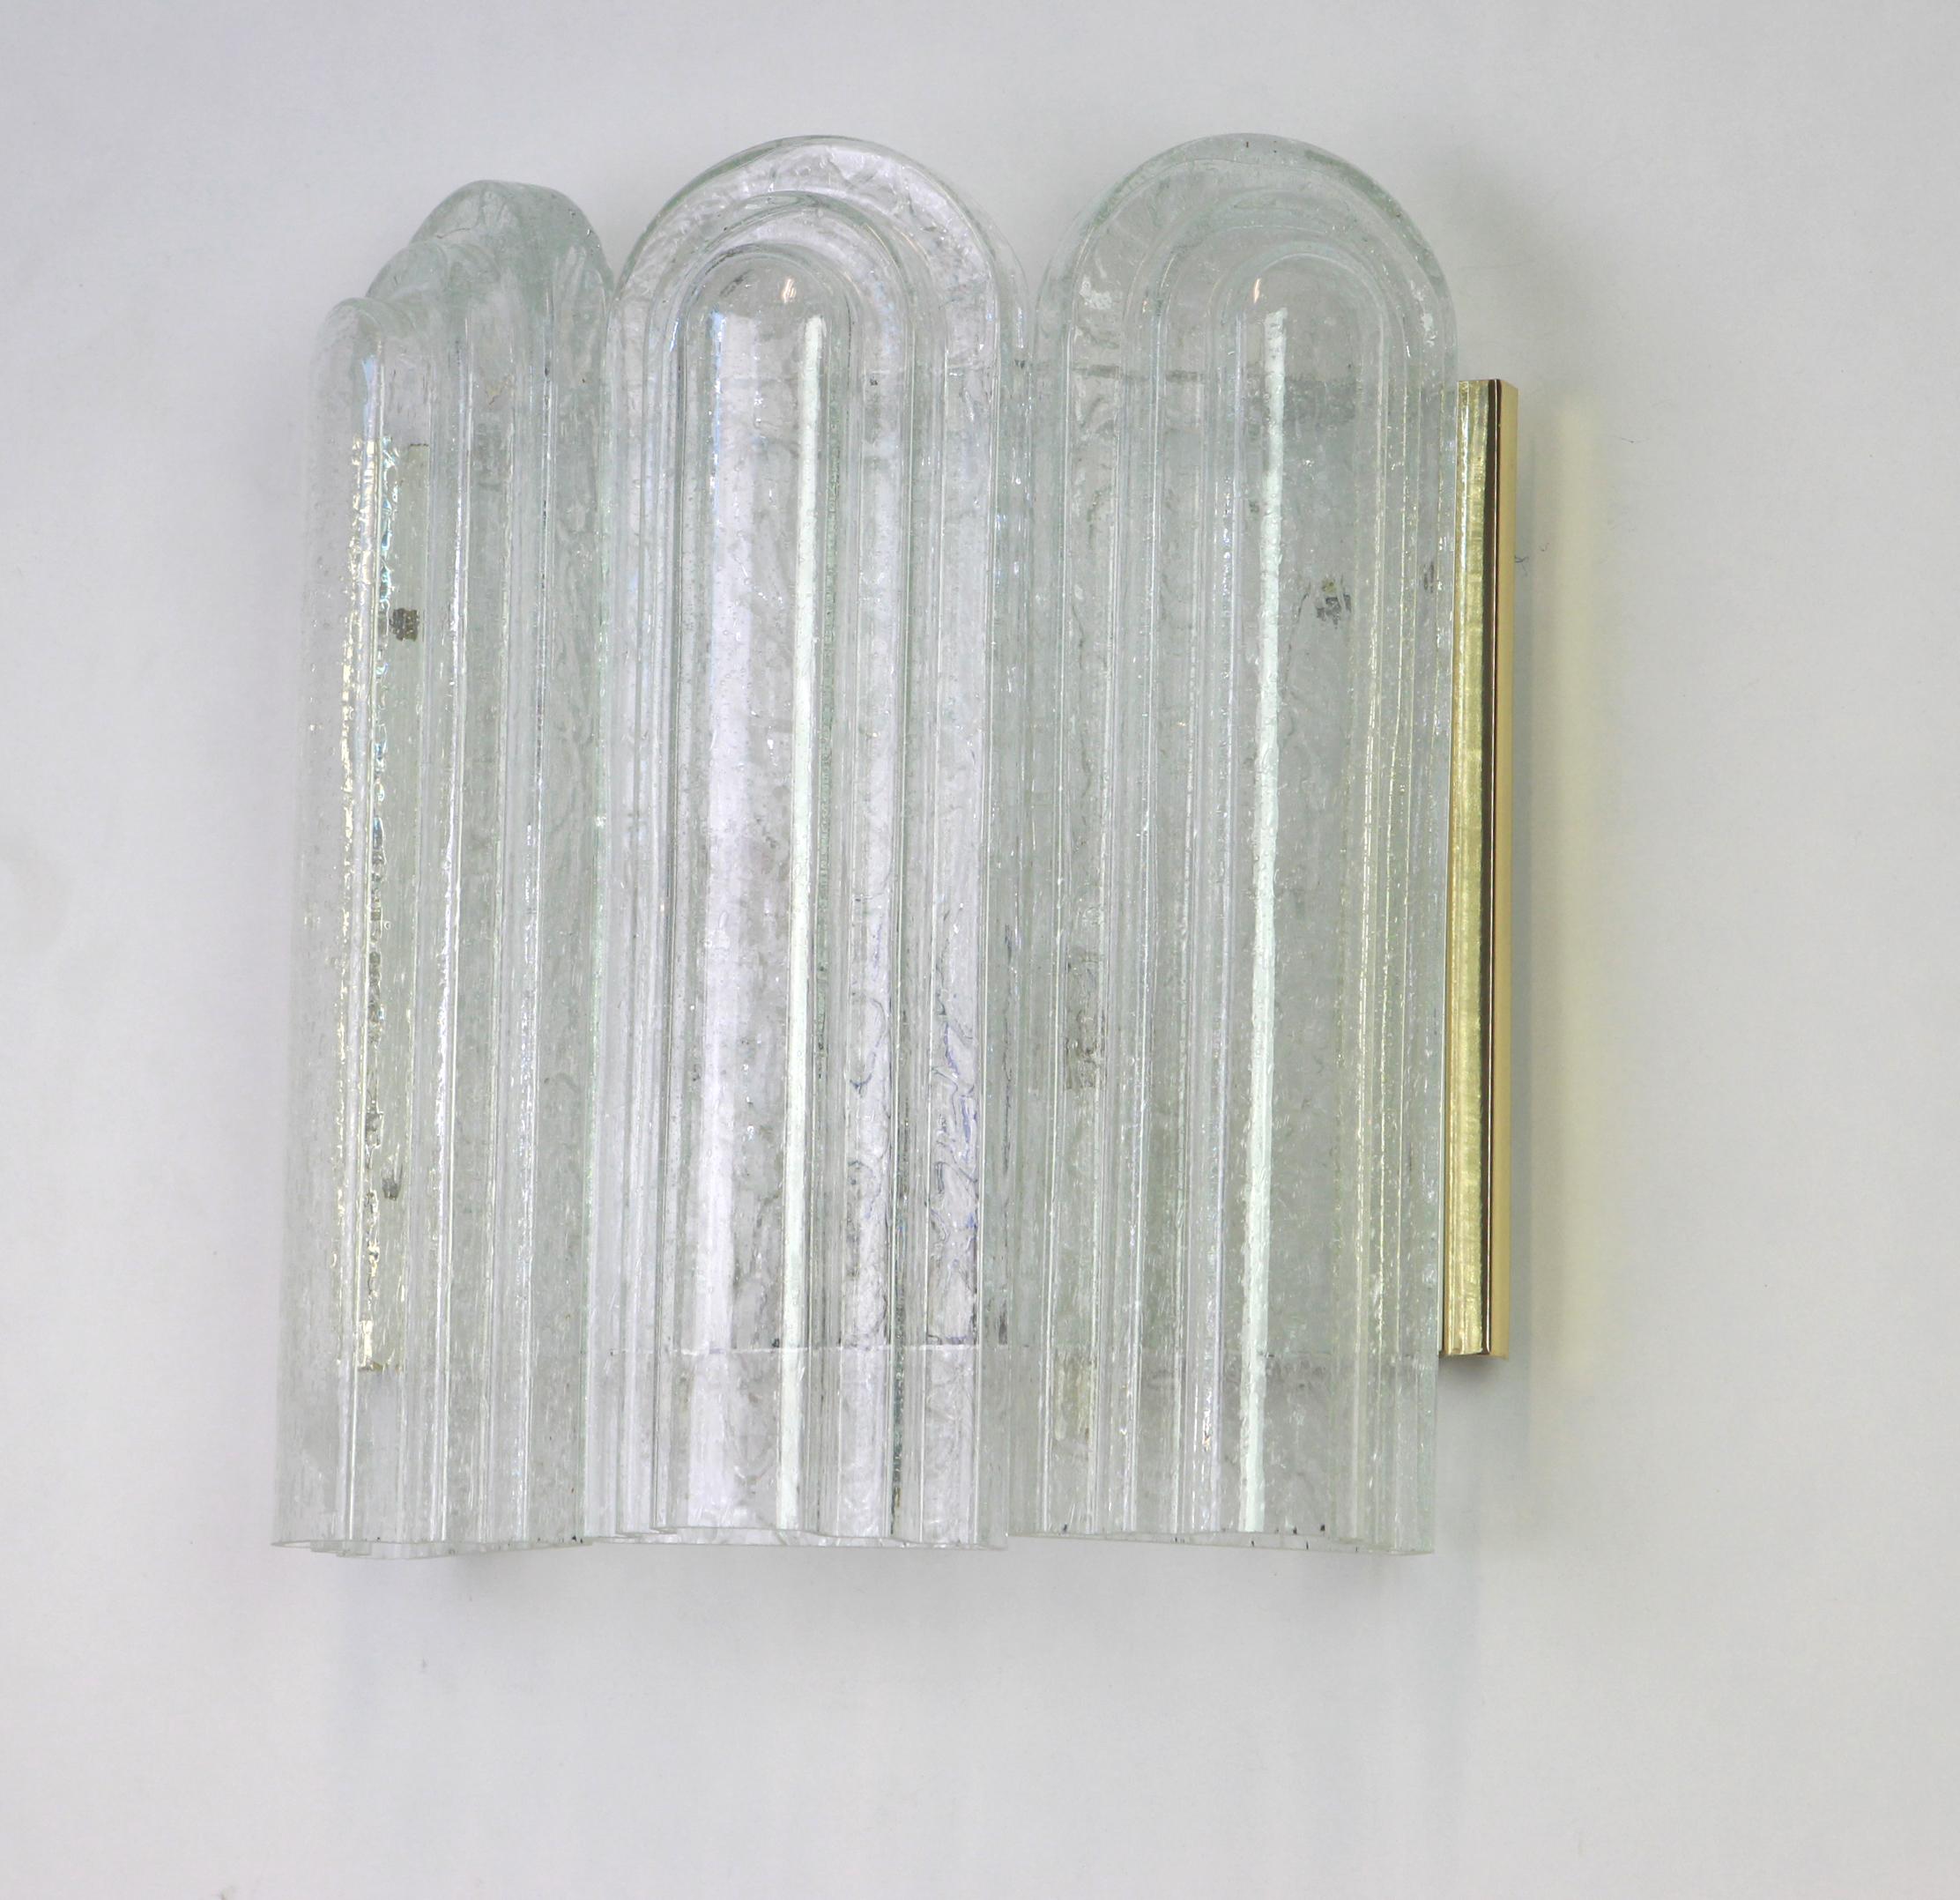 Wonderful pair of midcentury wall sconces with Murano glass elements, made by Doria Leuchten, Germany, manufactured, circa 1960-1969.
High quality and in very good condition. Cleaned, well-wired and ready to use.

Each sconce requires 2 x E27